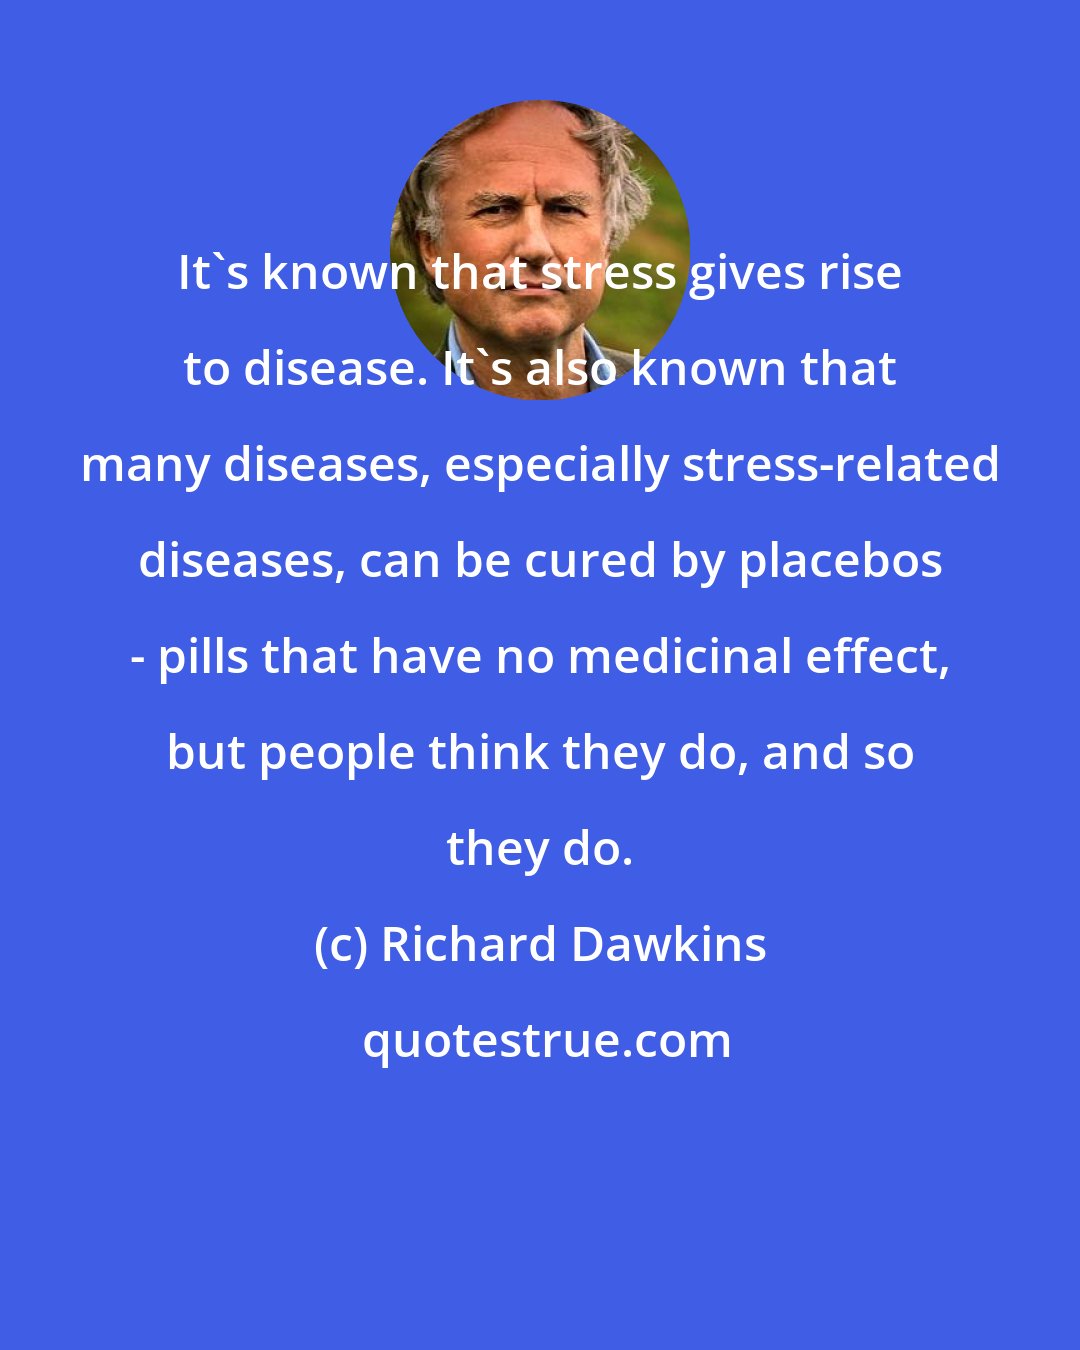 Richard Dawkins: It's known that stress gives rise to disease. It's also known that many diseases, especially stress-related diseases, can be cured by placebos - pills that have no medicinal effect, but people think they do, and so they do.